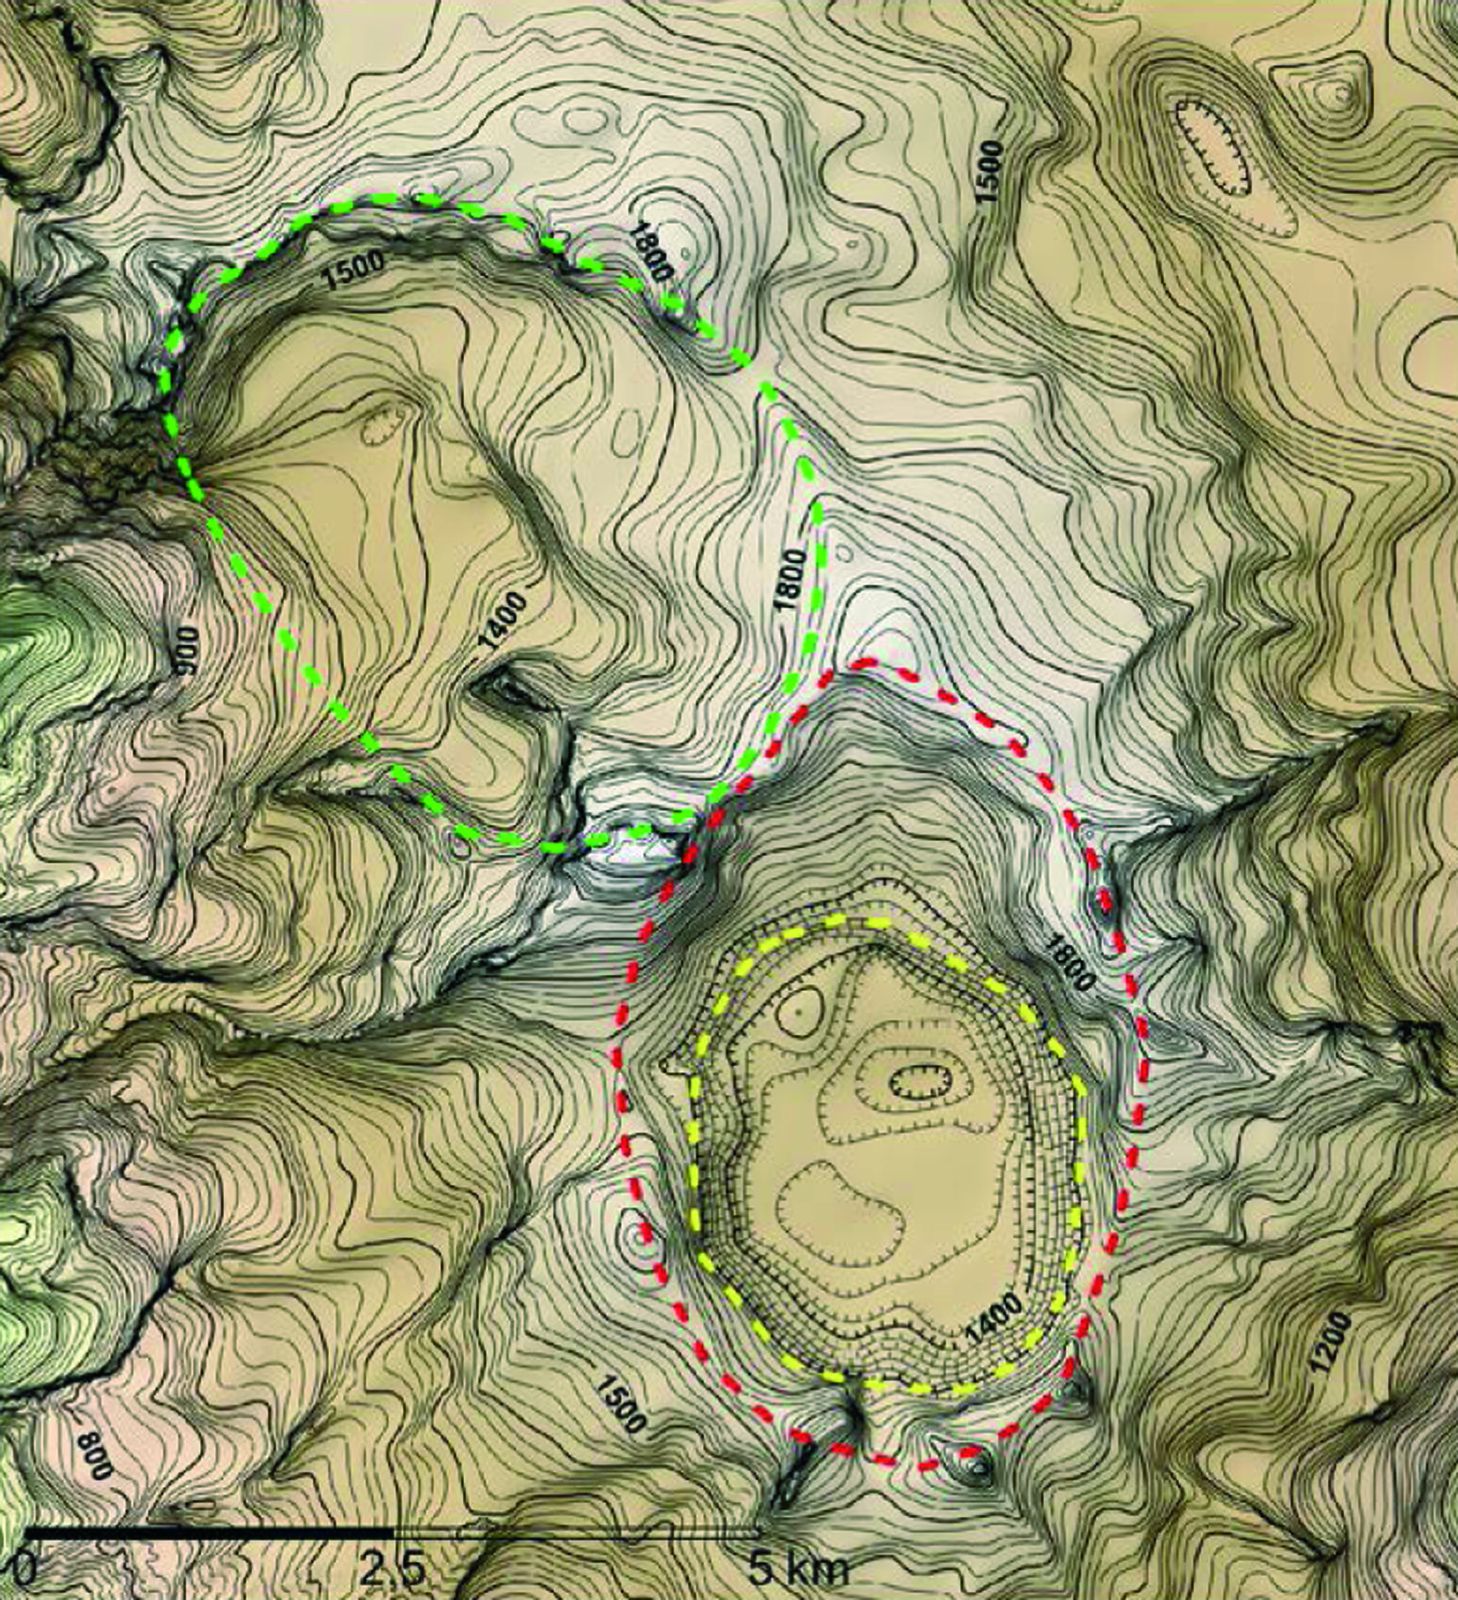 Topography of the bedrock of the central part of the Öraefajökull, with the current caldera (dashed red line), a potential intraludate formation (dashed yellow line) and a possible old eroded caldera (dotted green line) - - doc. Removing the ice cap of Öræfajökull central volcano, SE-Iceland: Mapping and interpretation of bedrock topography, ice volumes, subglacial troughs and implications for hazards assessments Eyjólfur Magnússon, Finnur Pálsson, Helgi Björnsson and Snævarr Guðmundsson - 2014